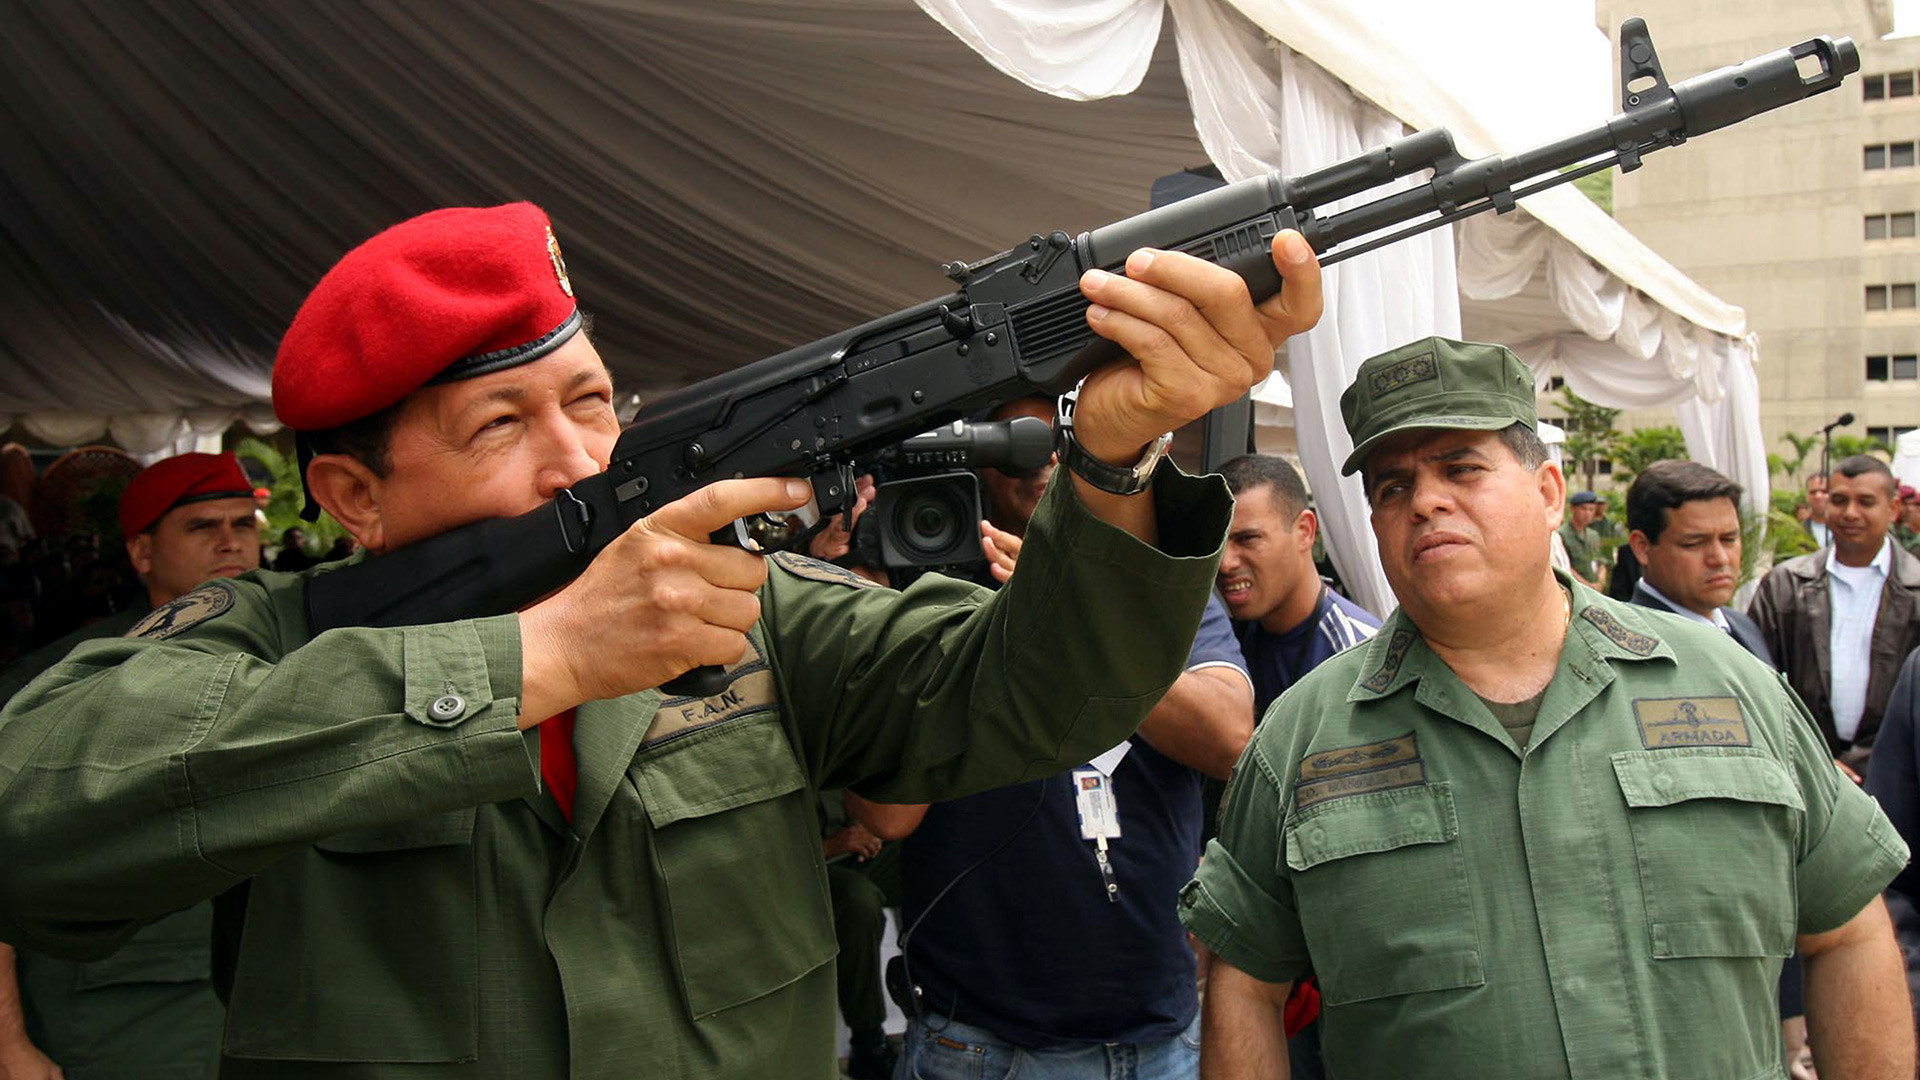 Venezuelan president Hugo Chavez with an AK-103 during a military exhibition in Caracas in 2006.